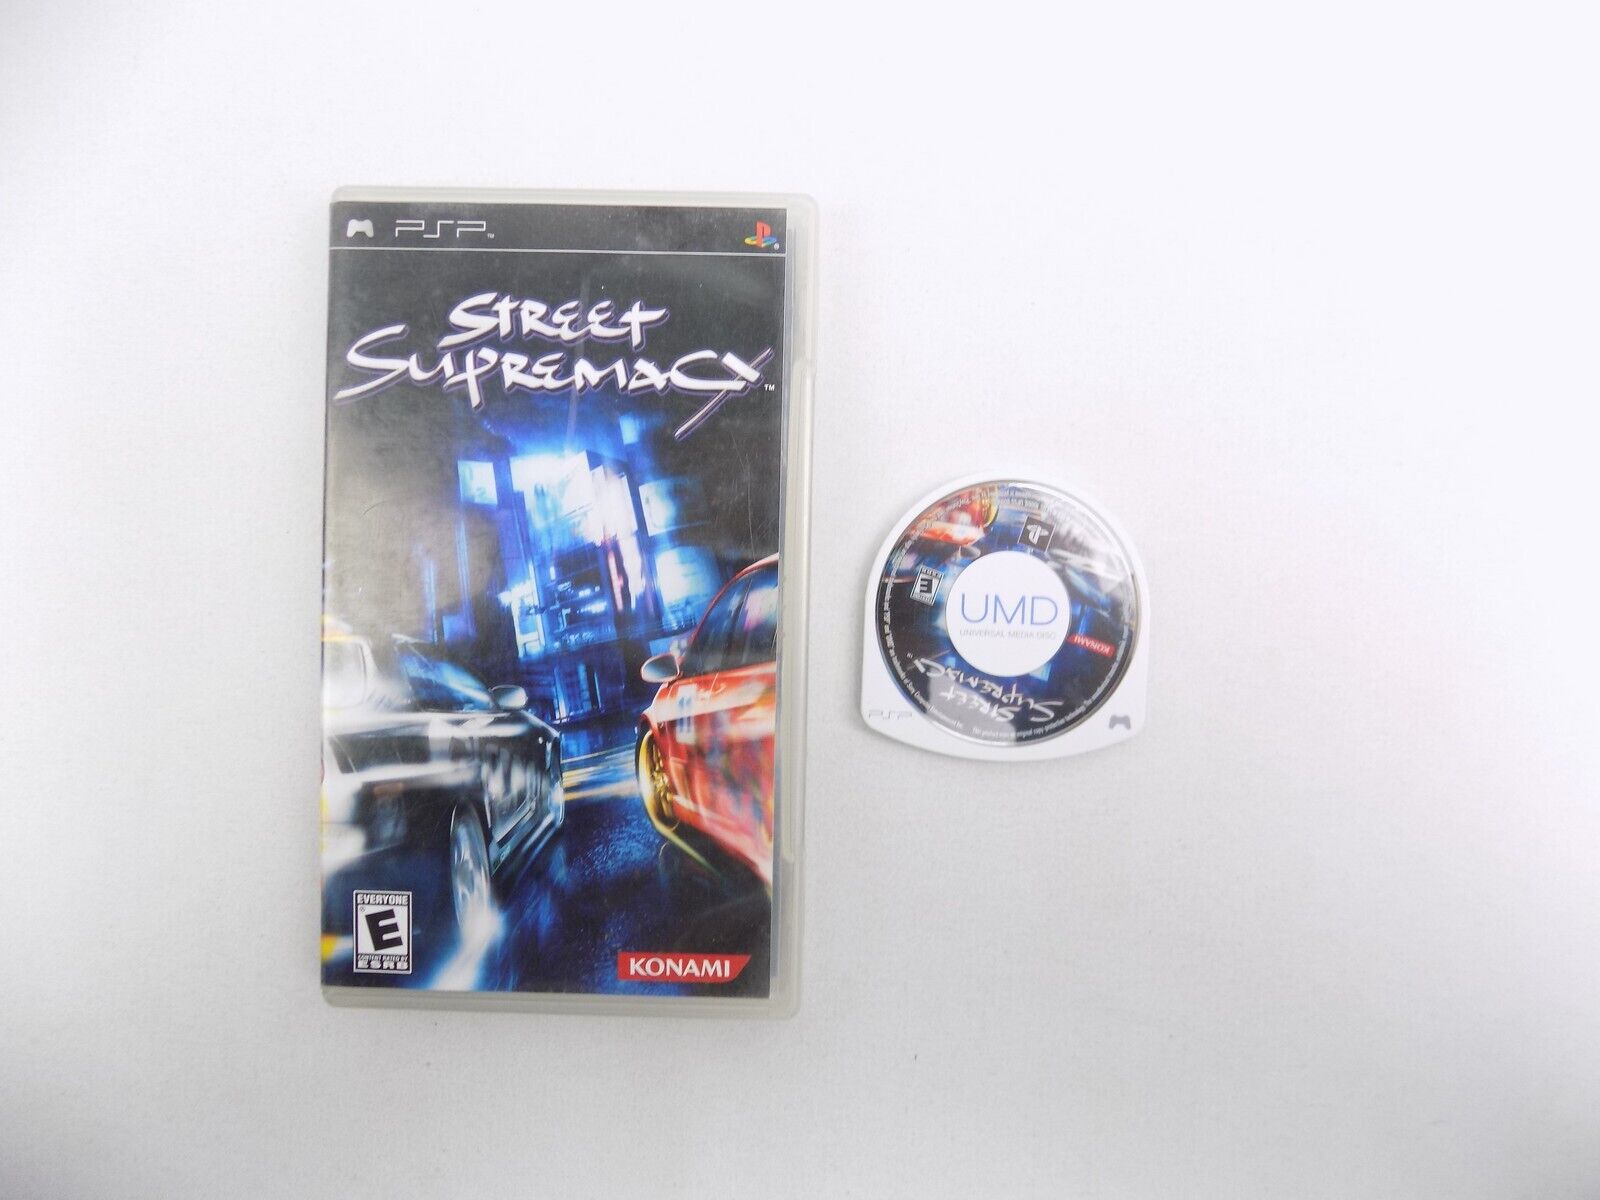 Playstation Portable PSP Street Supremacy - No Manual Free Postage